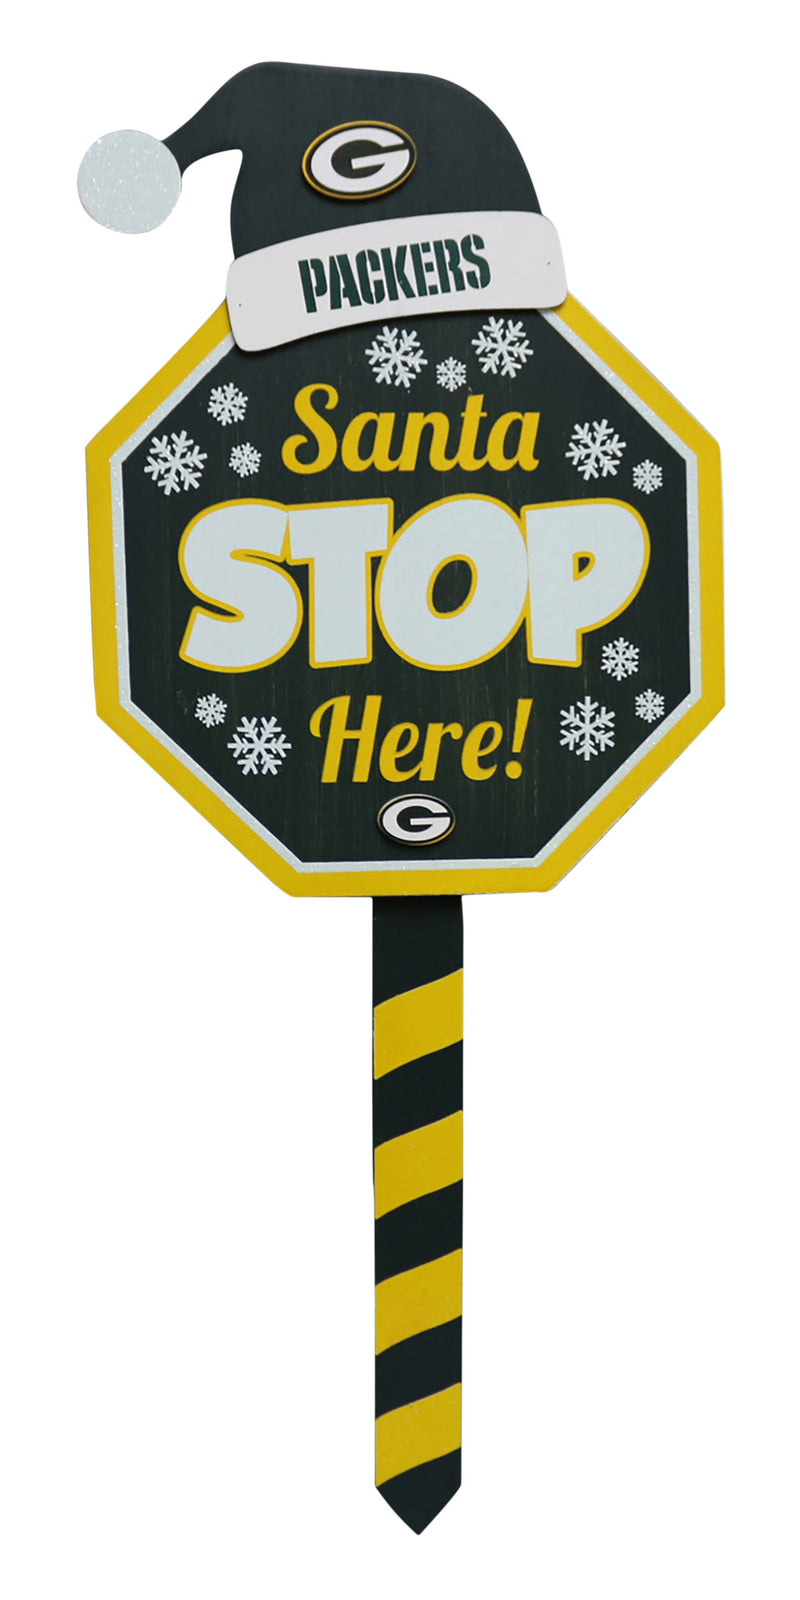 Green Bay Packers Santa Stop Here! 25" Lawn Sign